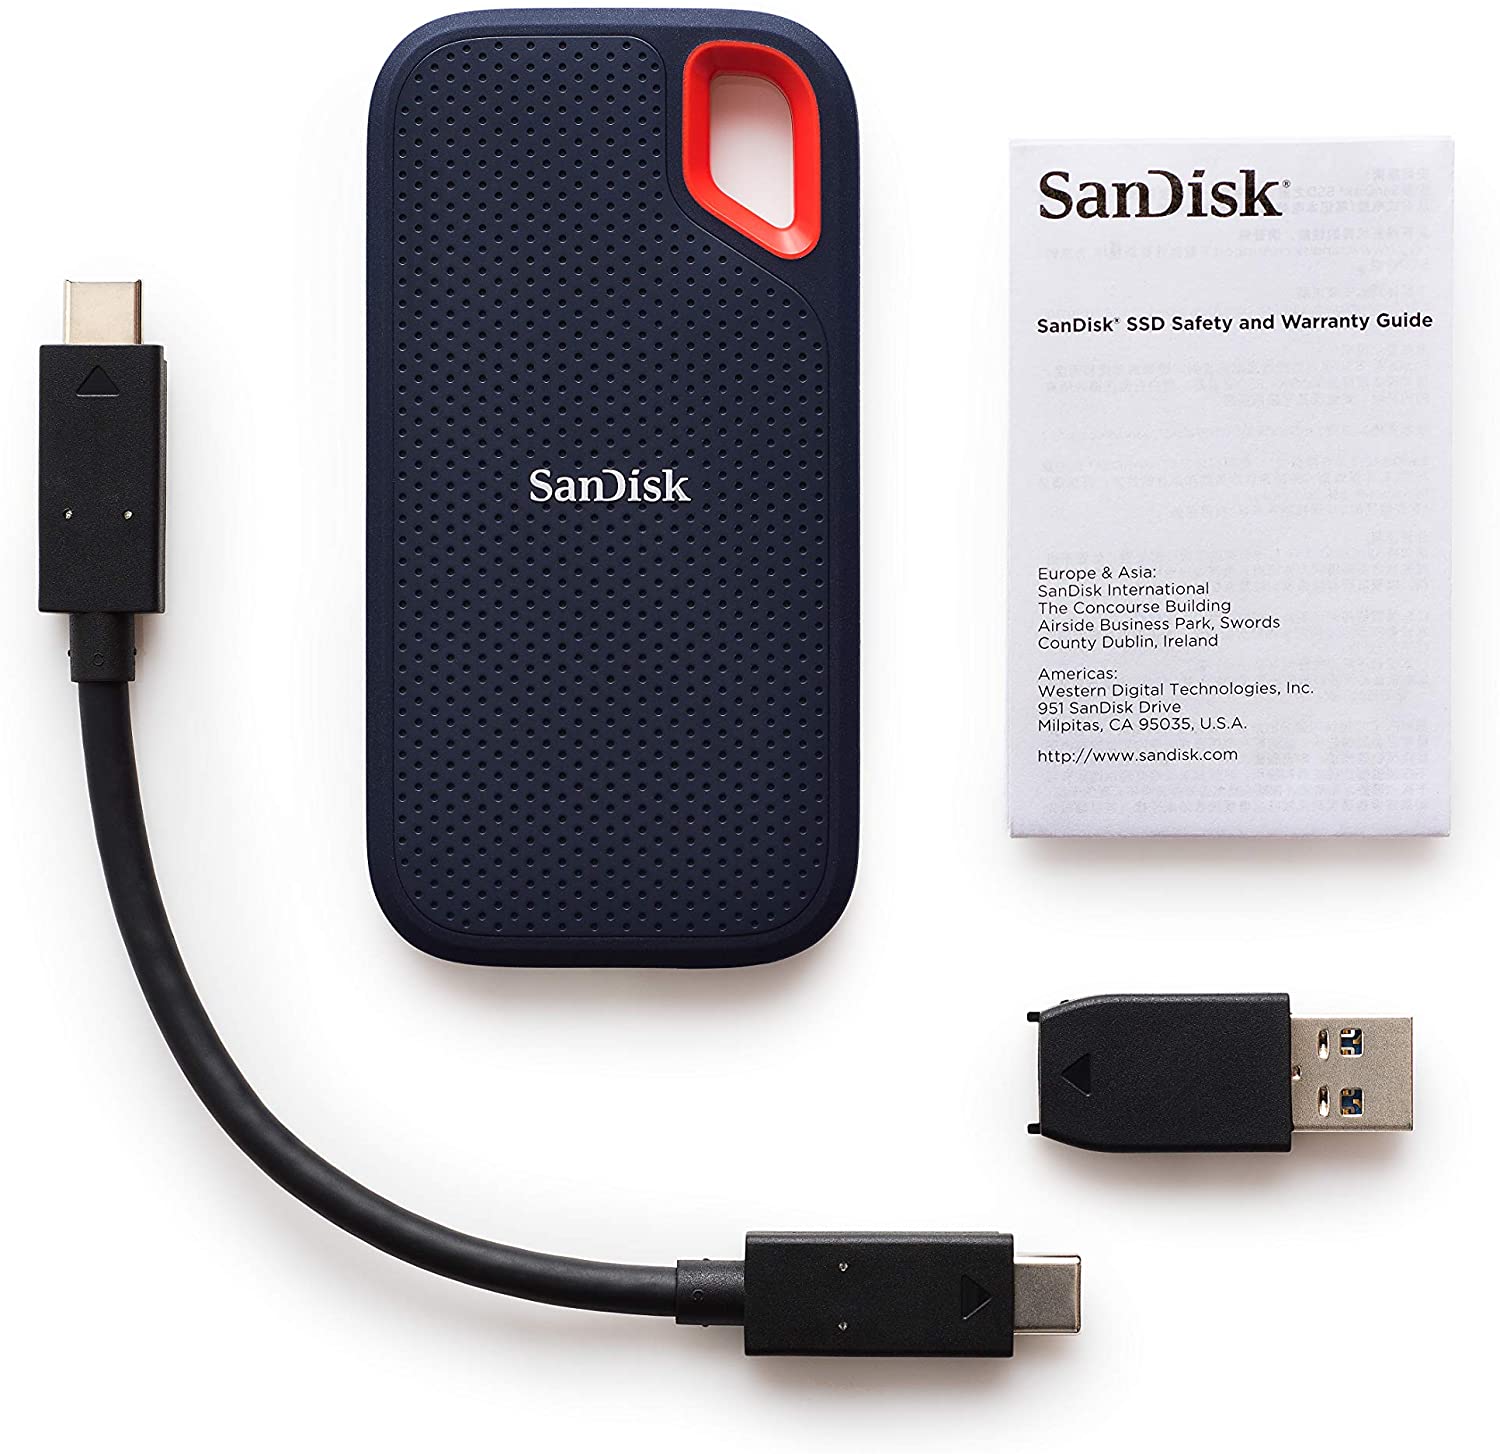 Ssd Externo Sandisk Extreme Portable Ssd 500Gb